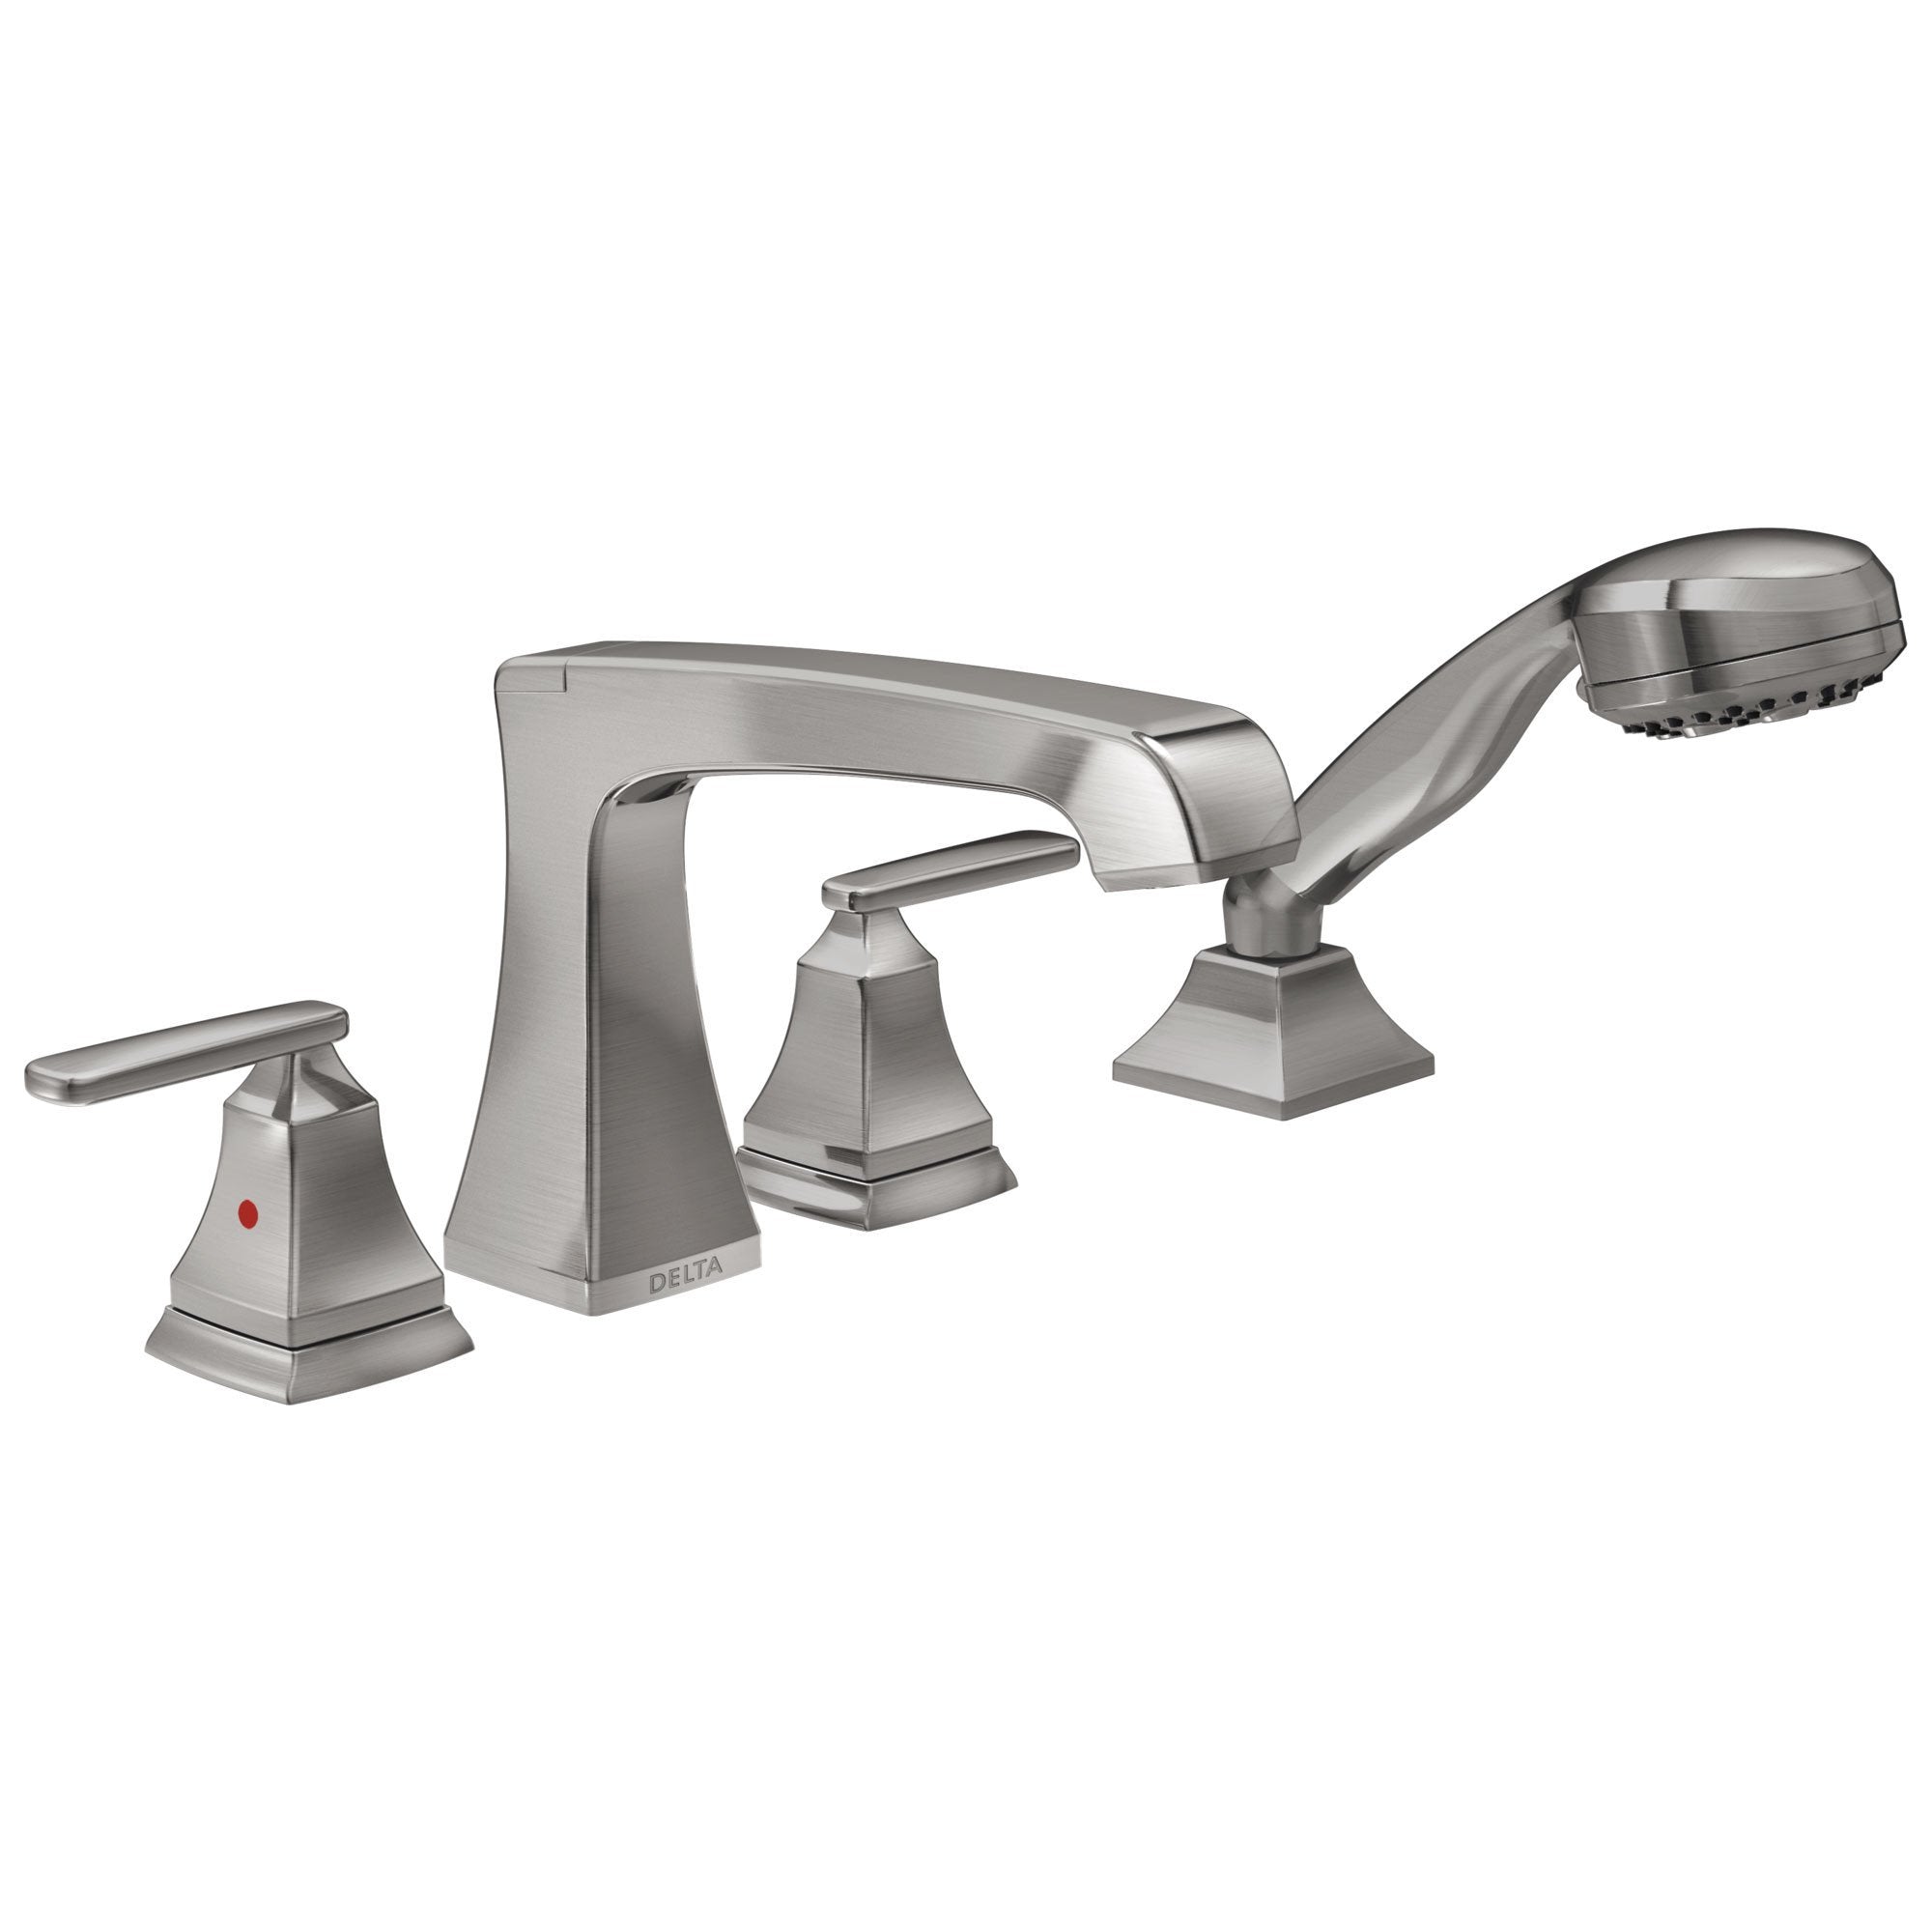 Delta Ashlyn Collection Stainless Steel Finish High Flow Roman Bath Tub Filler Faucet Trim with Hand Shower Sprayer (Requires Rough-in Valve) DT4764SS